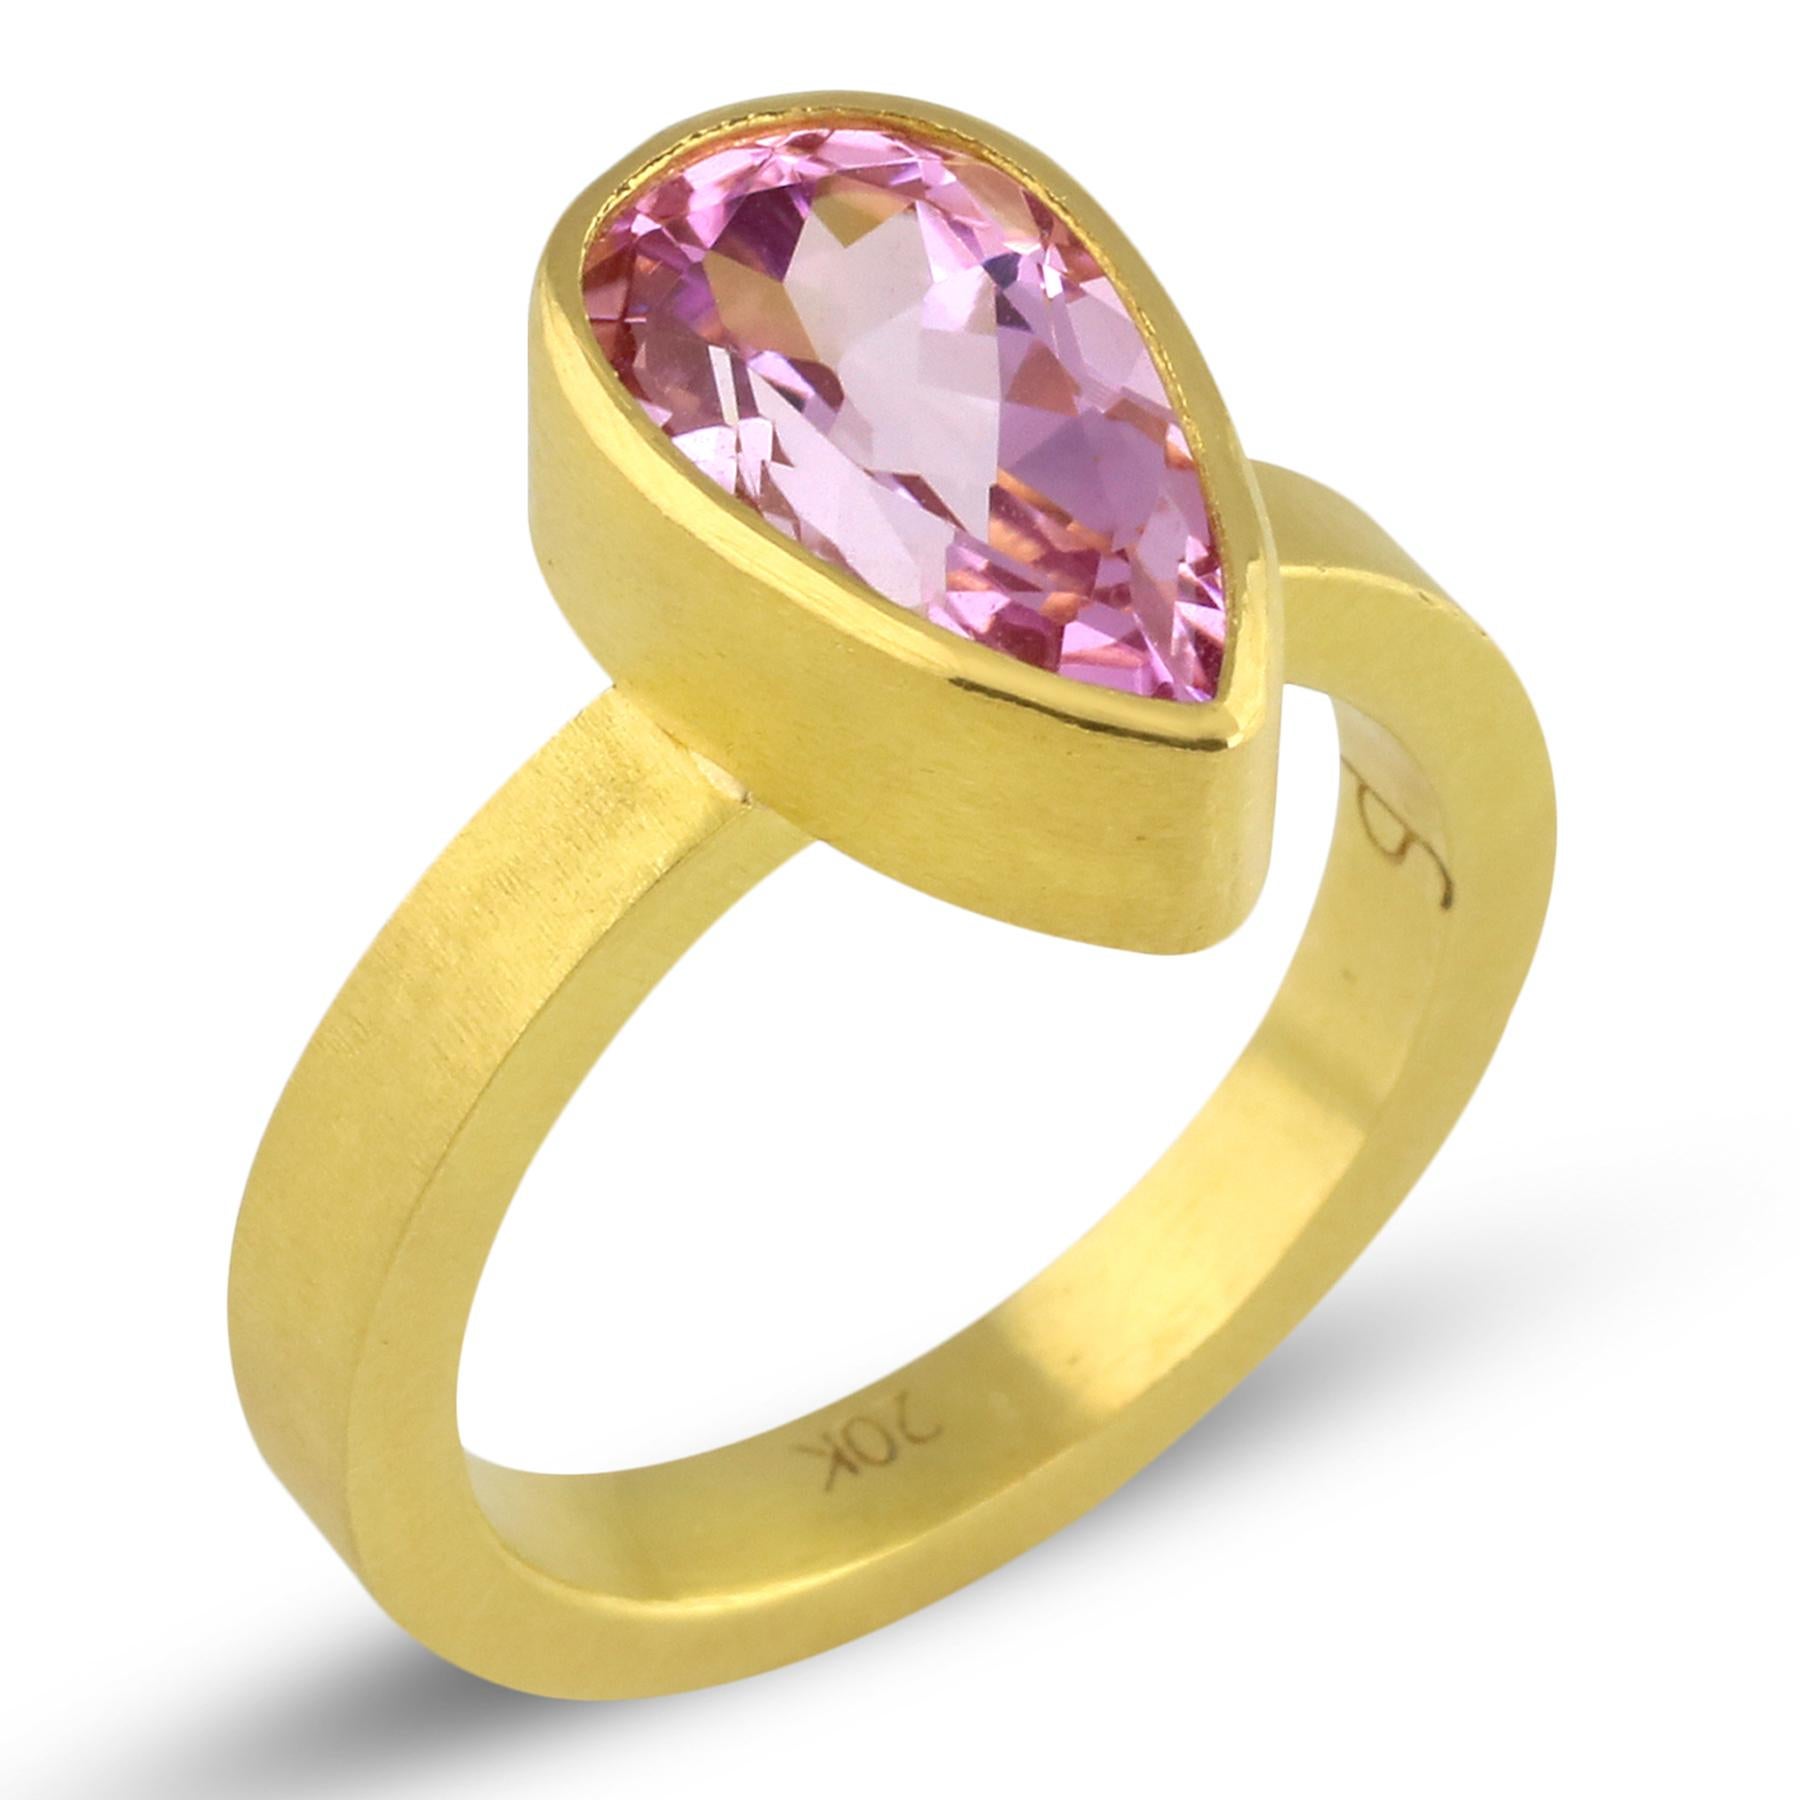 Artisan PHILIPPE SPENCER 3.85 Ct. Pink Morganite in 22K and 20K Gold Statement Ring For Sale